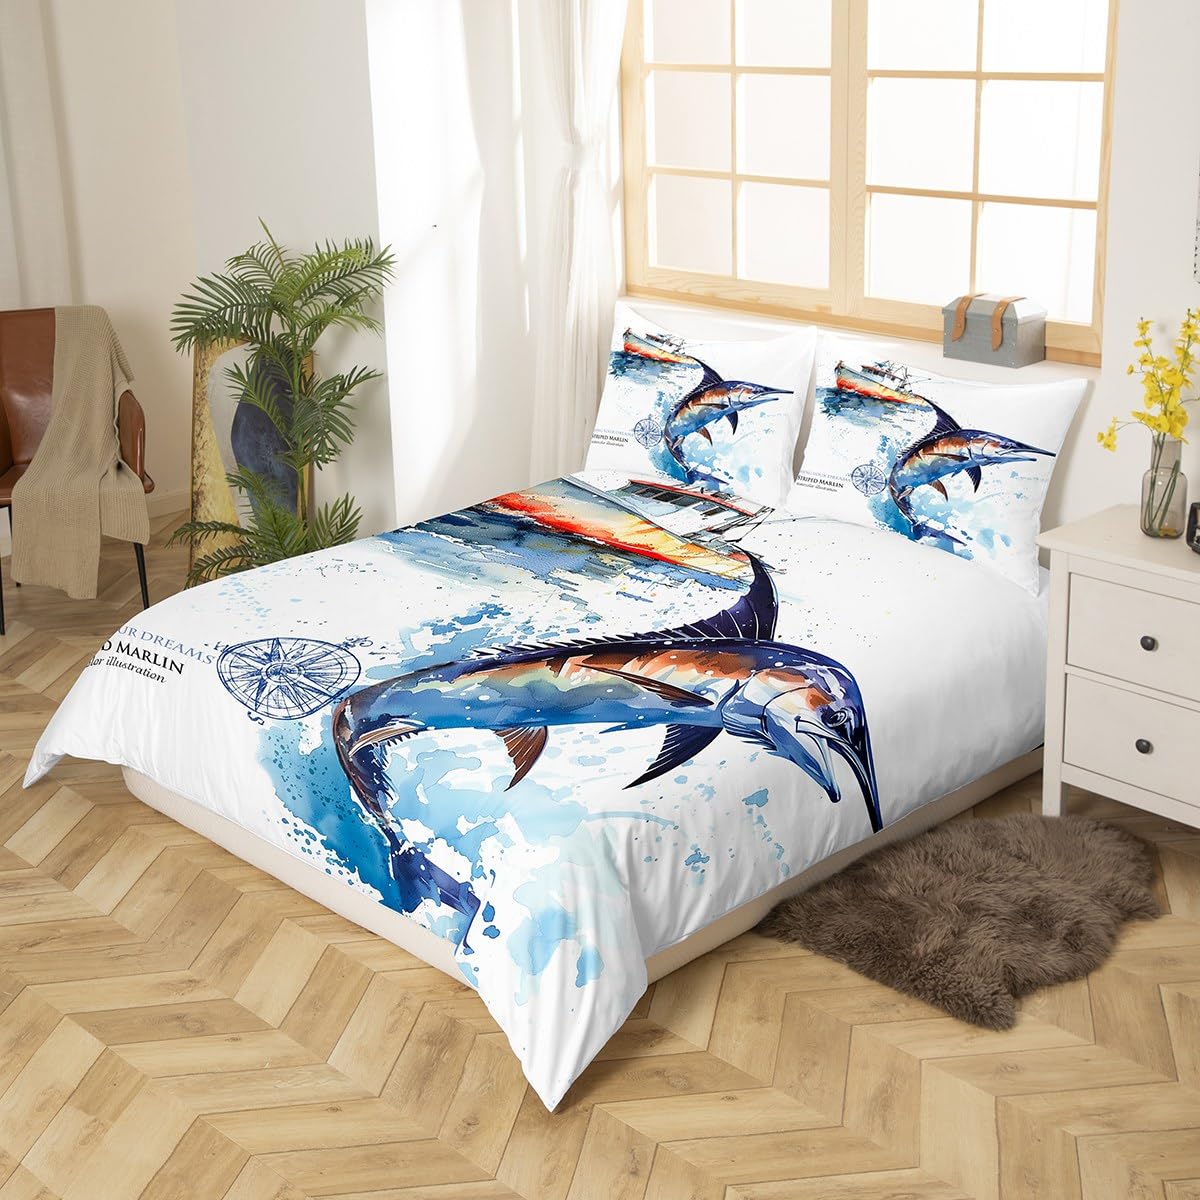 Marlin Swordfish Comforter Cover Tie Dye Duvet Cover Sets Hunting And Fishing Bedding Set For Kids Boys Girls Sea Fishing Boat Marine life Nautical Quilt Cover With 2 Pillow Cases Queen Size Blue